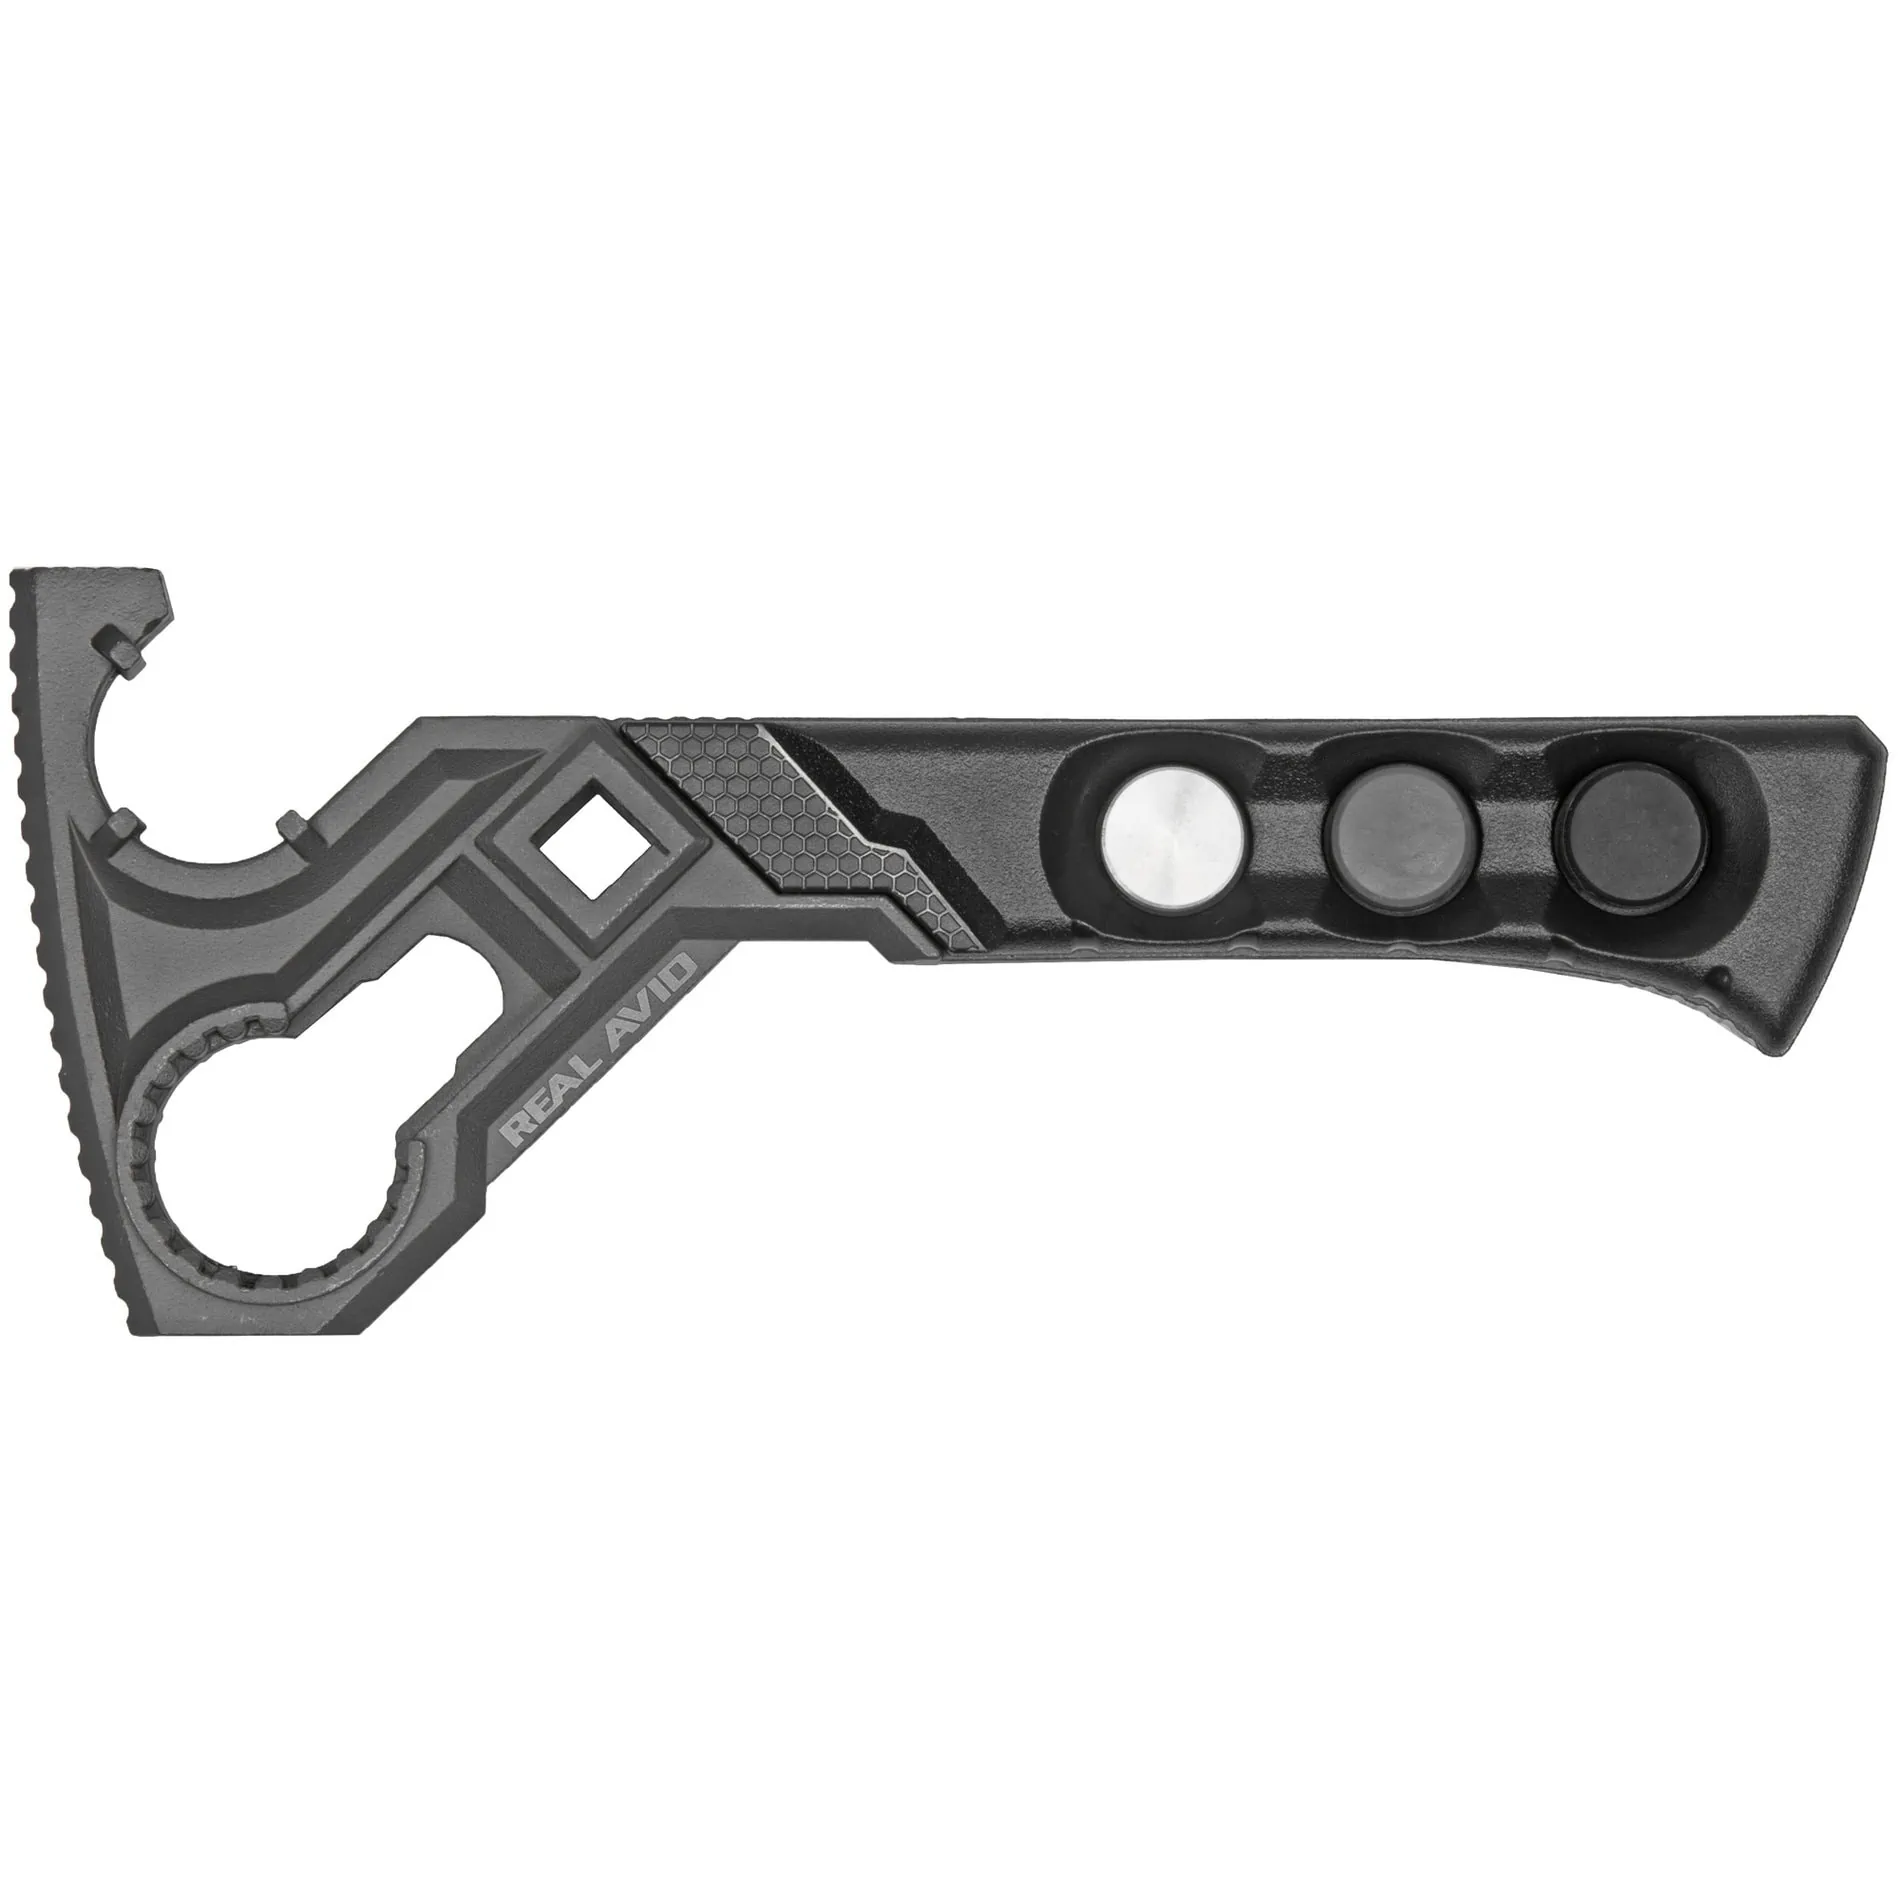 Real Avid Armorer's Master Wrench for AR-15